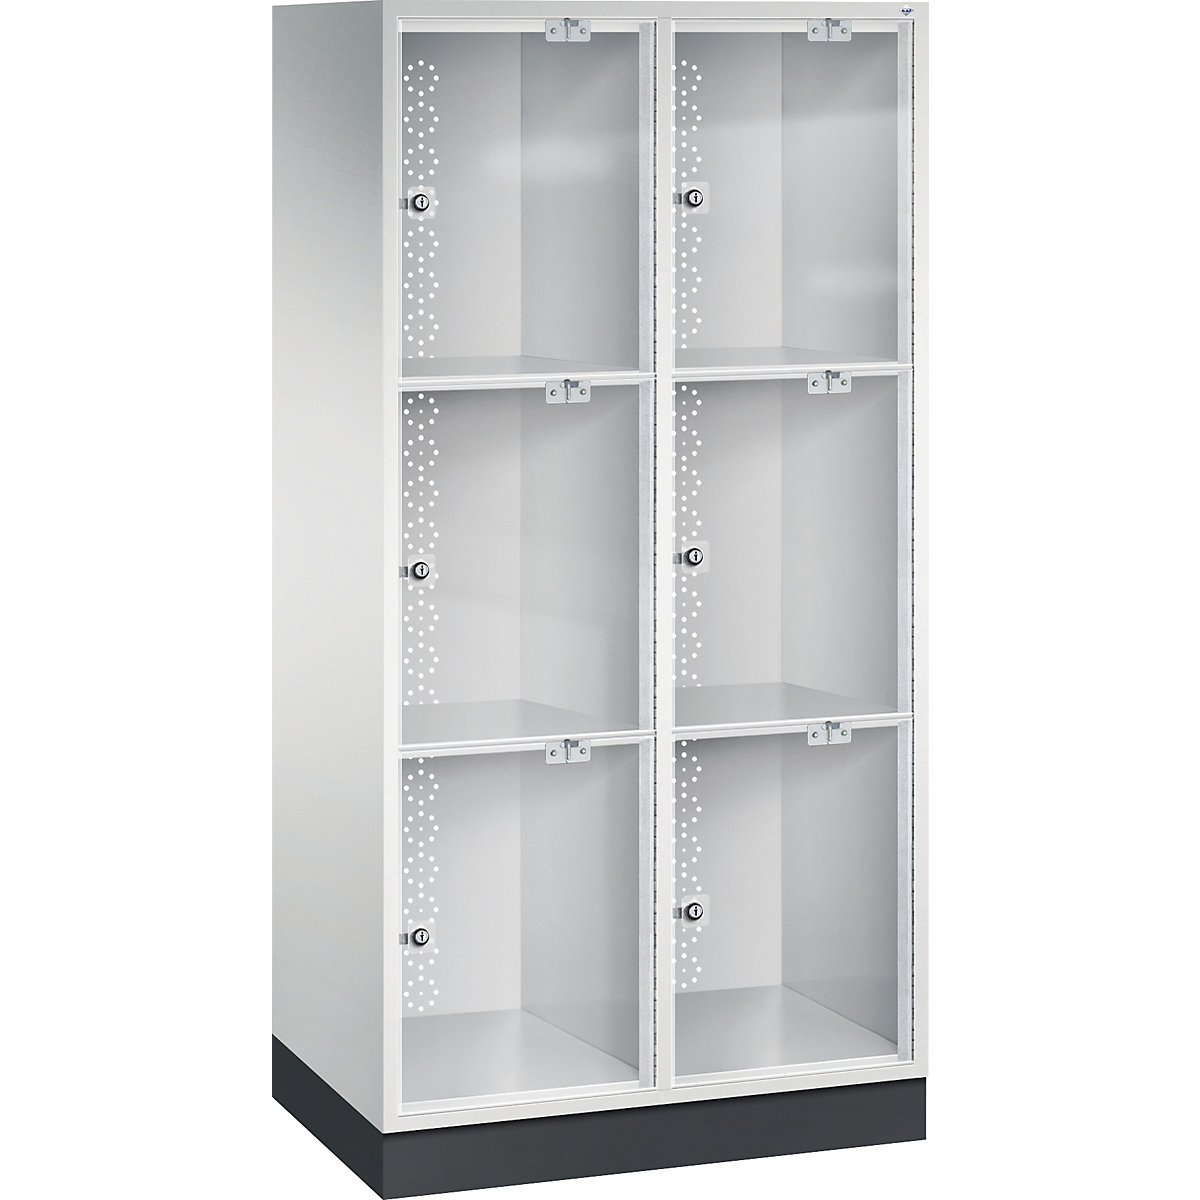 with door x compartment 510 kaiserkraft compartments x HxWxD acrylic INTRO – compartment C+P: 500 6 glass steel height mm, locker mm, 1750 820 |